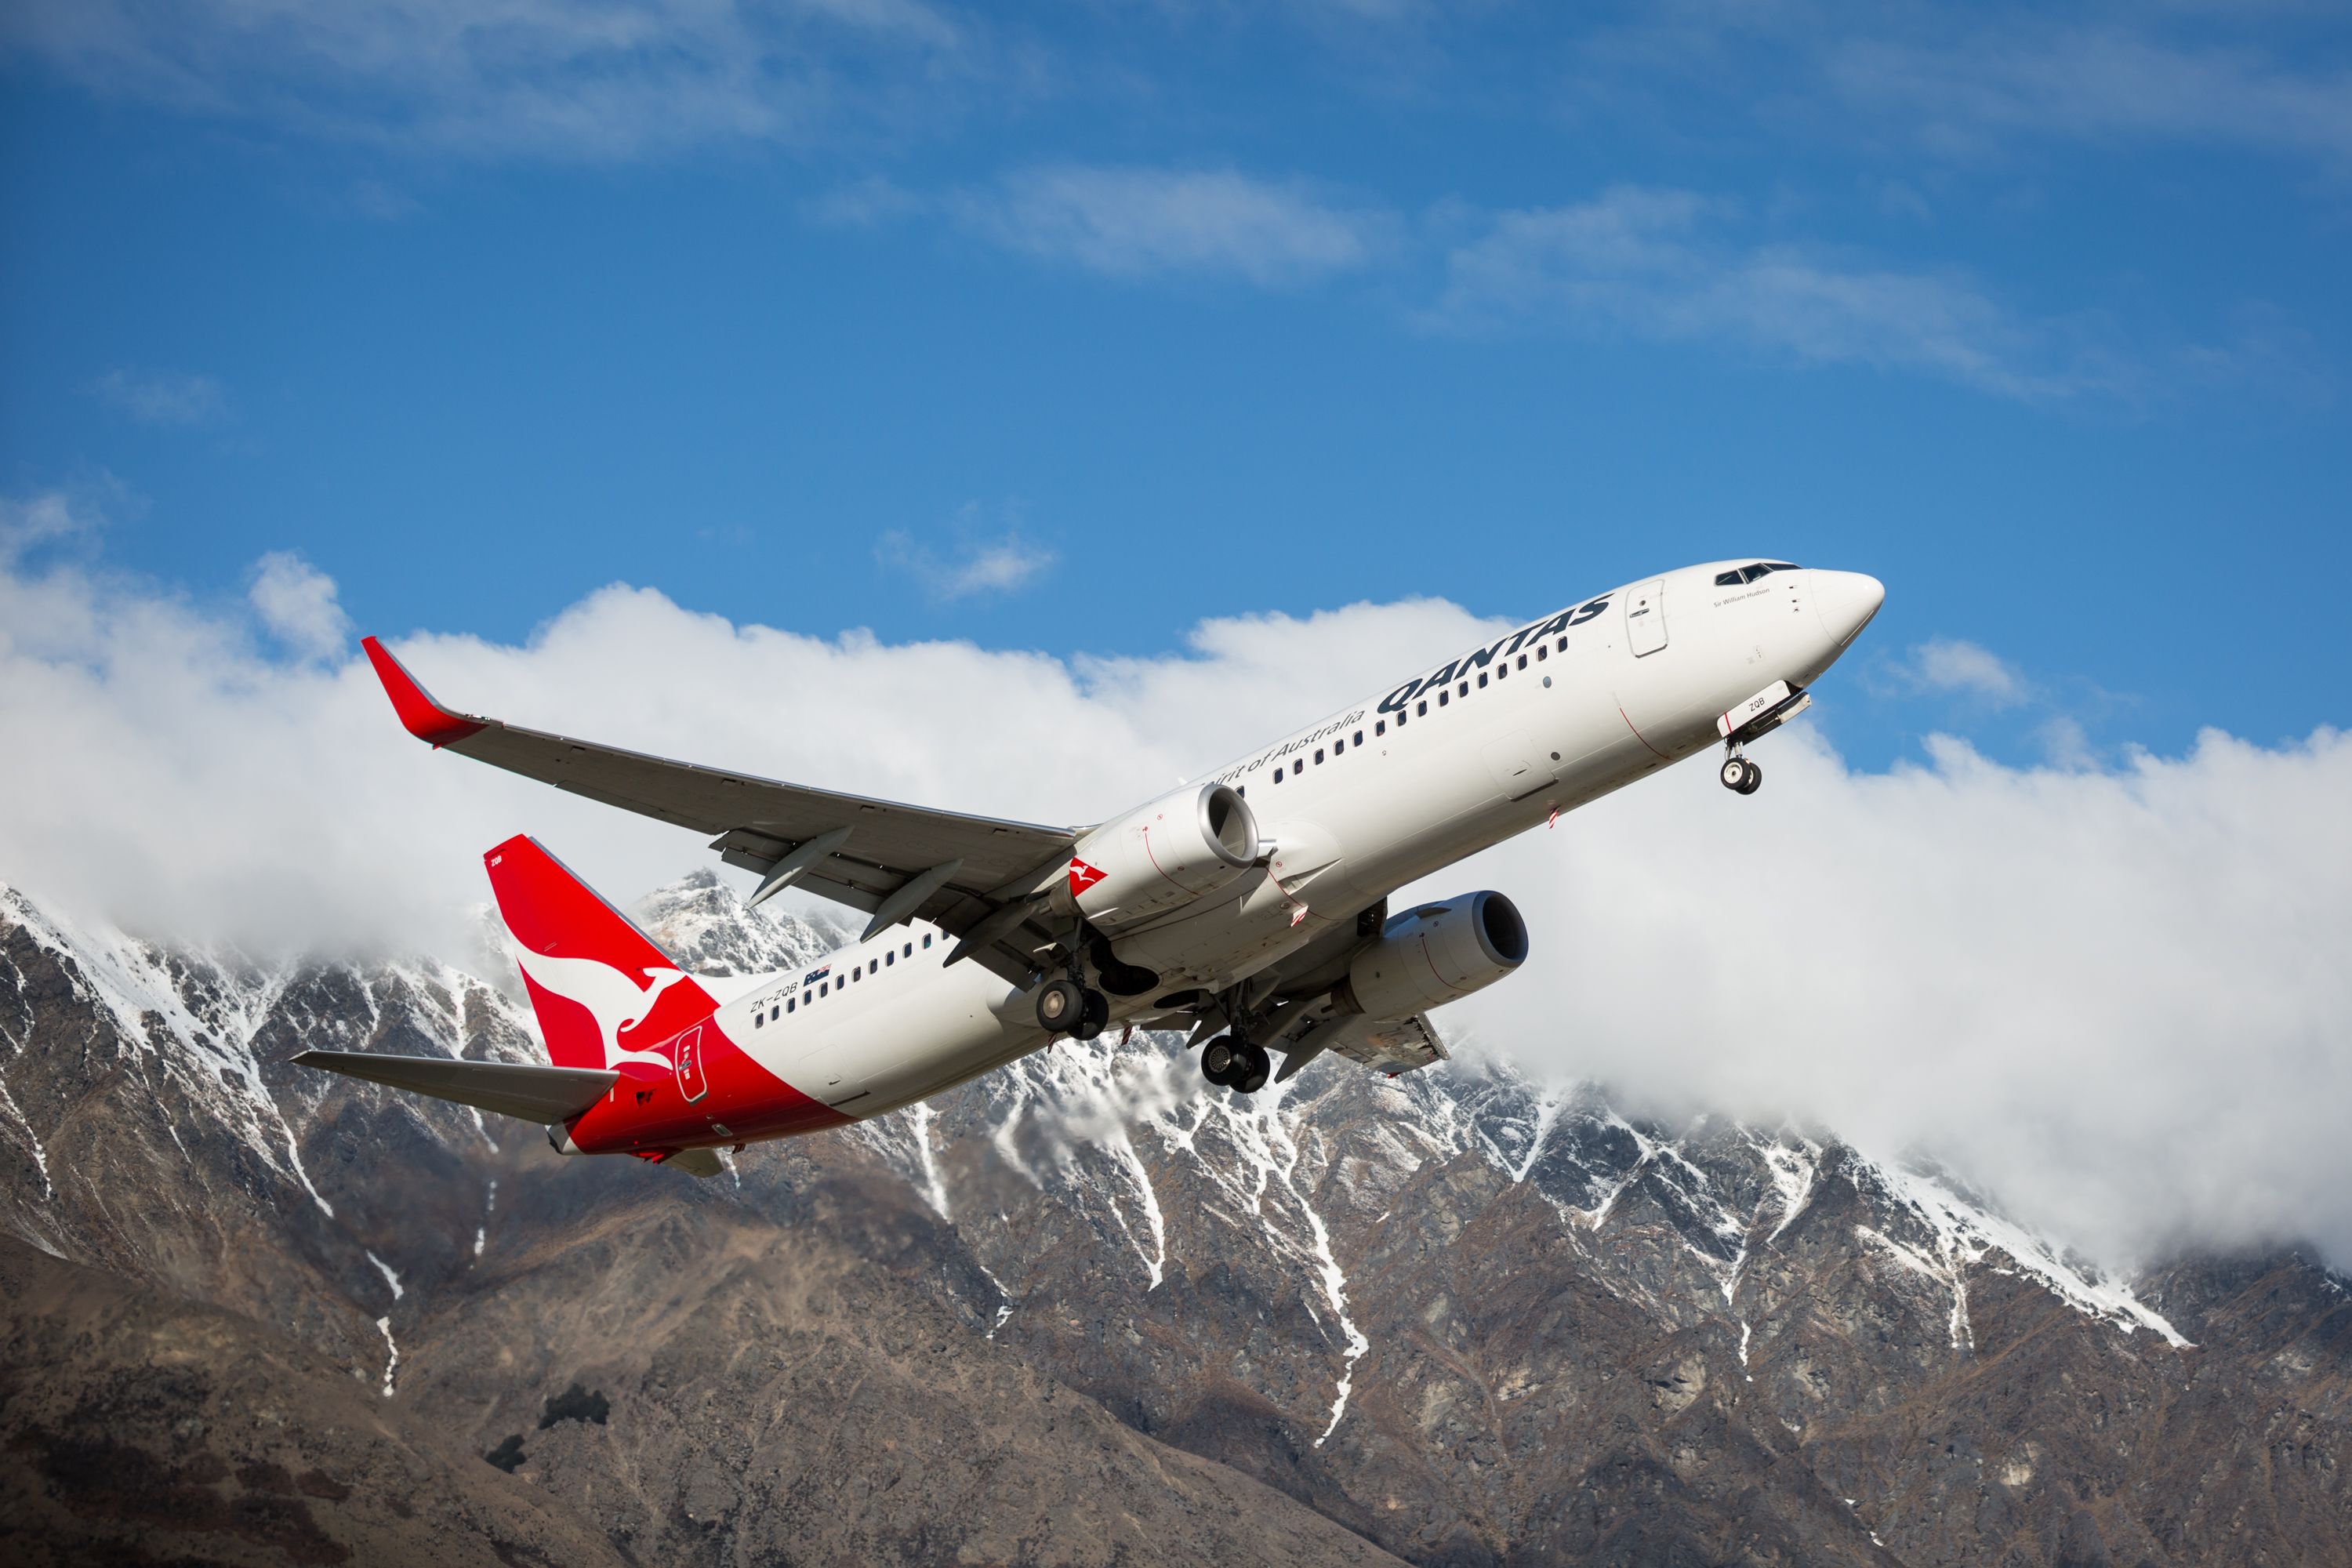 Qantas Boeing 737-800 New Zealand The Remarkables flying in front of mountain